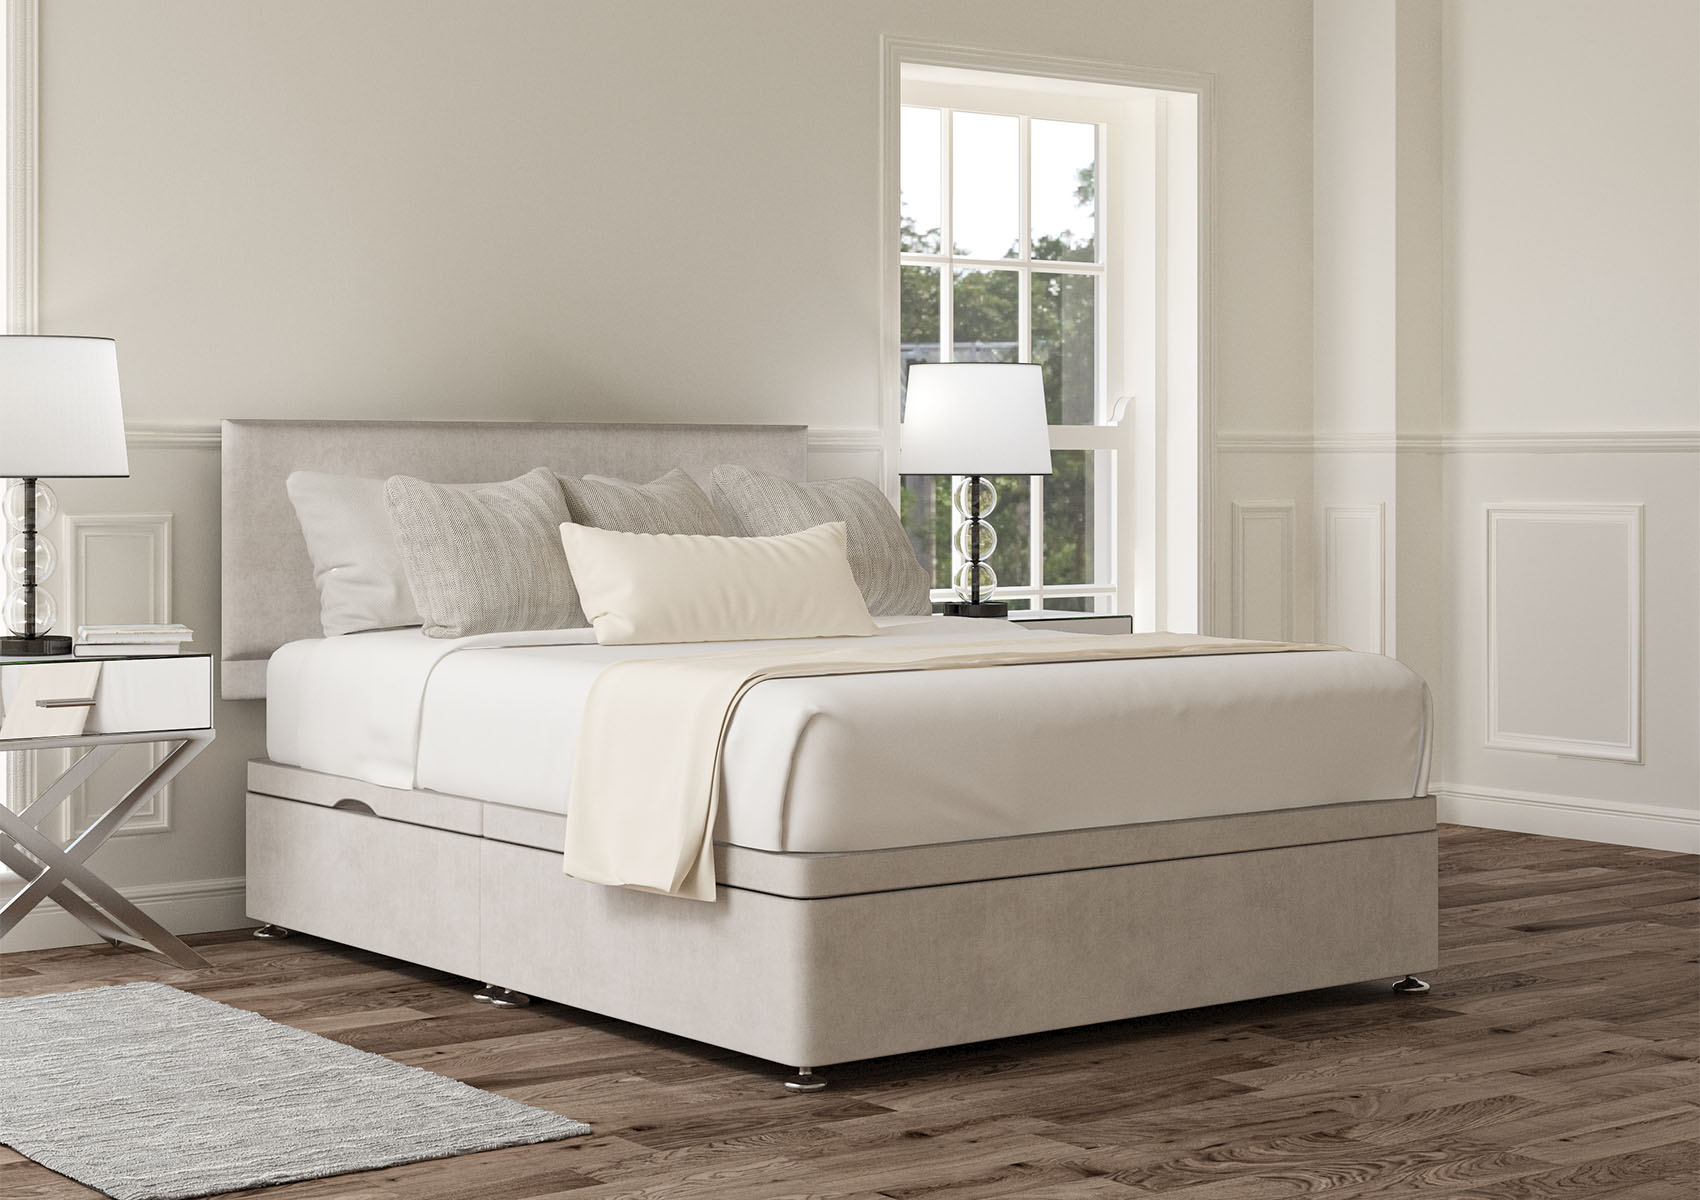 View Henley Verona Silver Upholstered Single Ottoman Bed Time4Sleep information